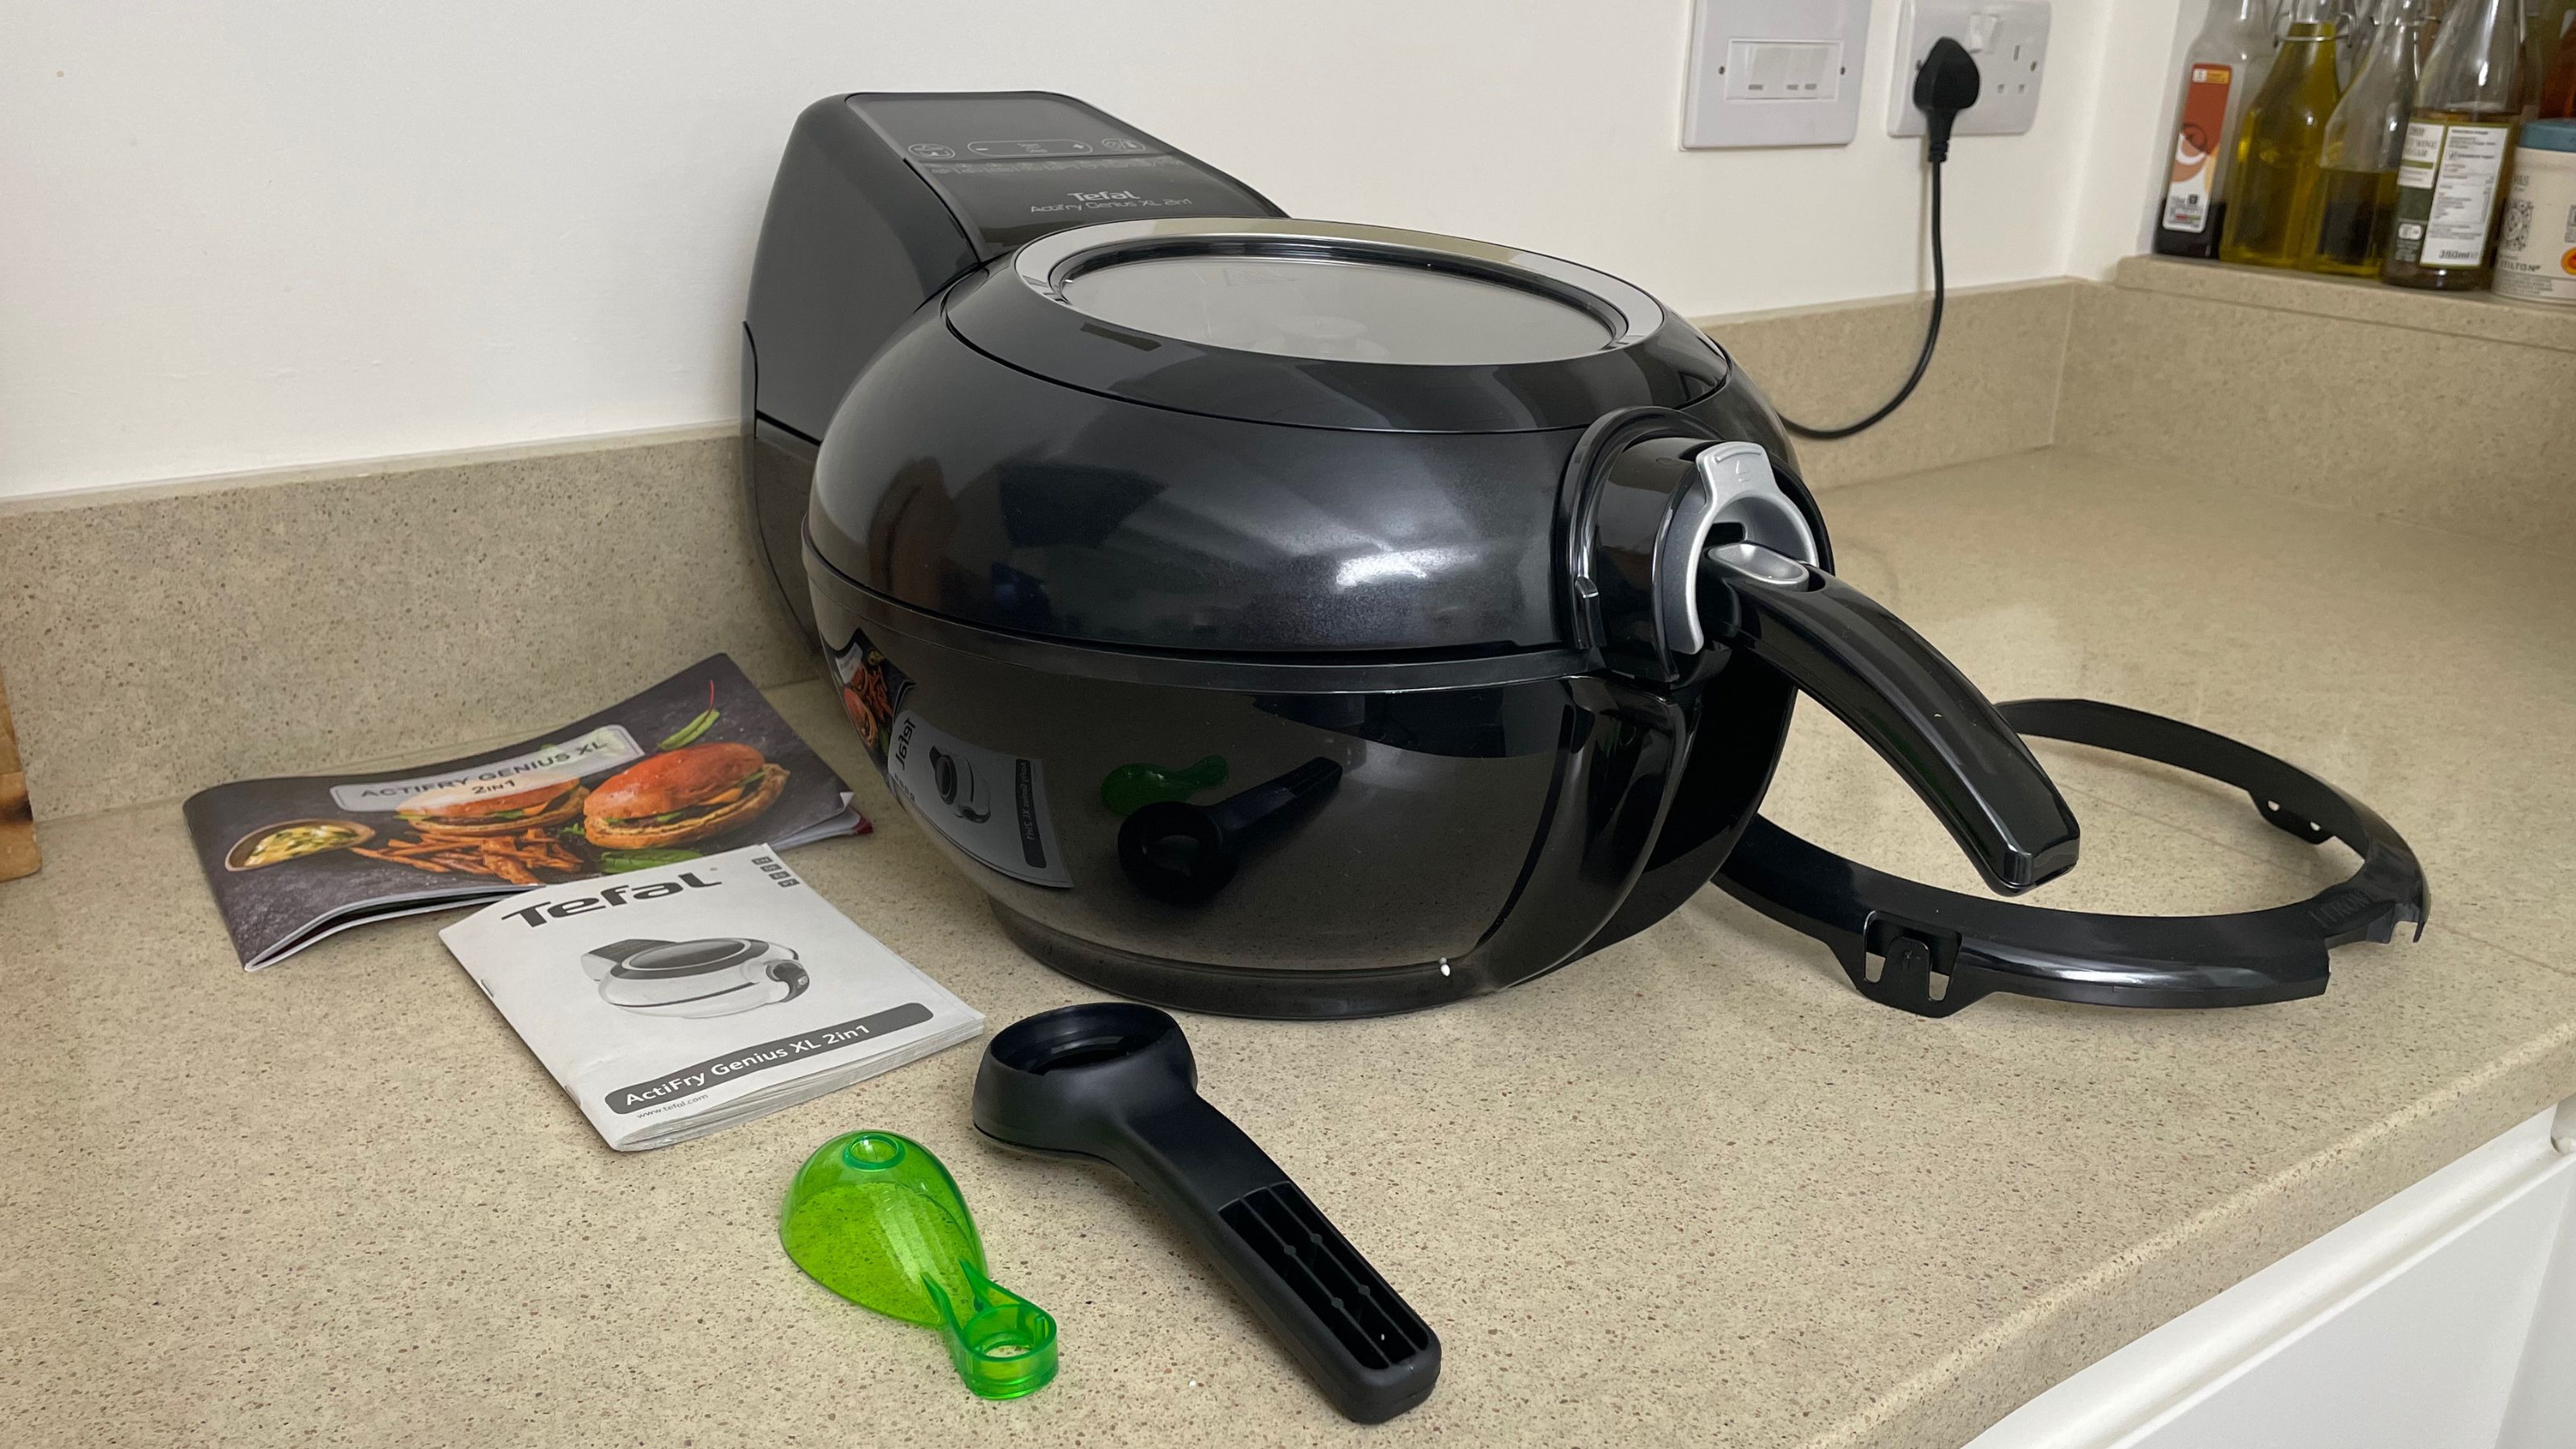 This On-Sale Ninja Air Fryer Has a Genius Feature That Takes the